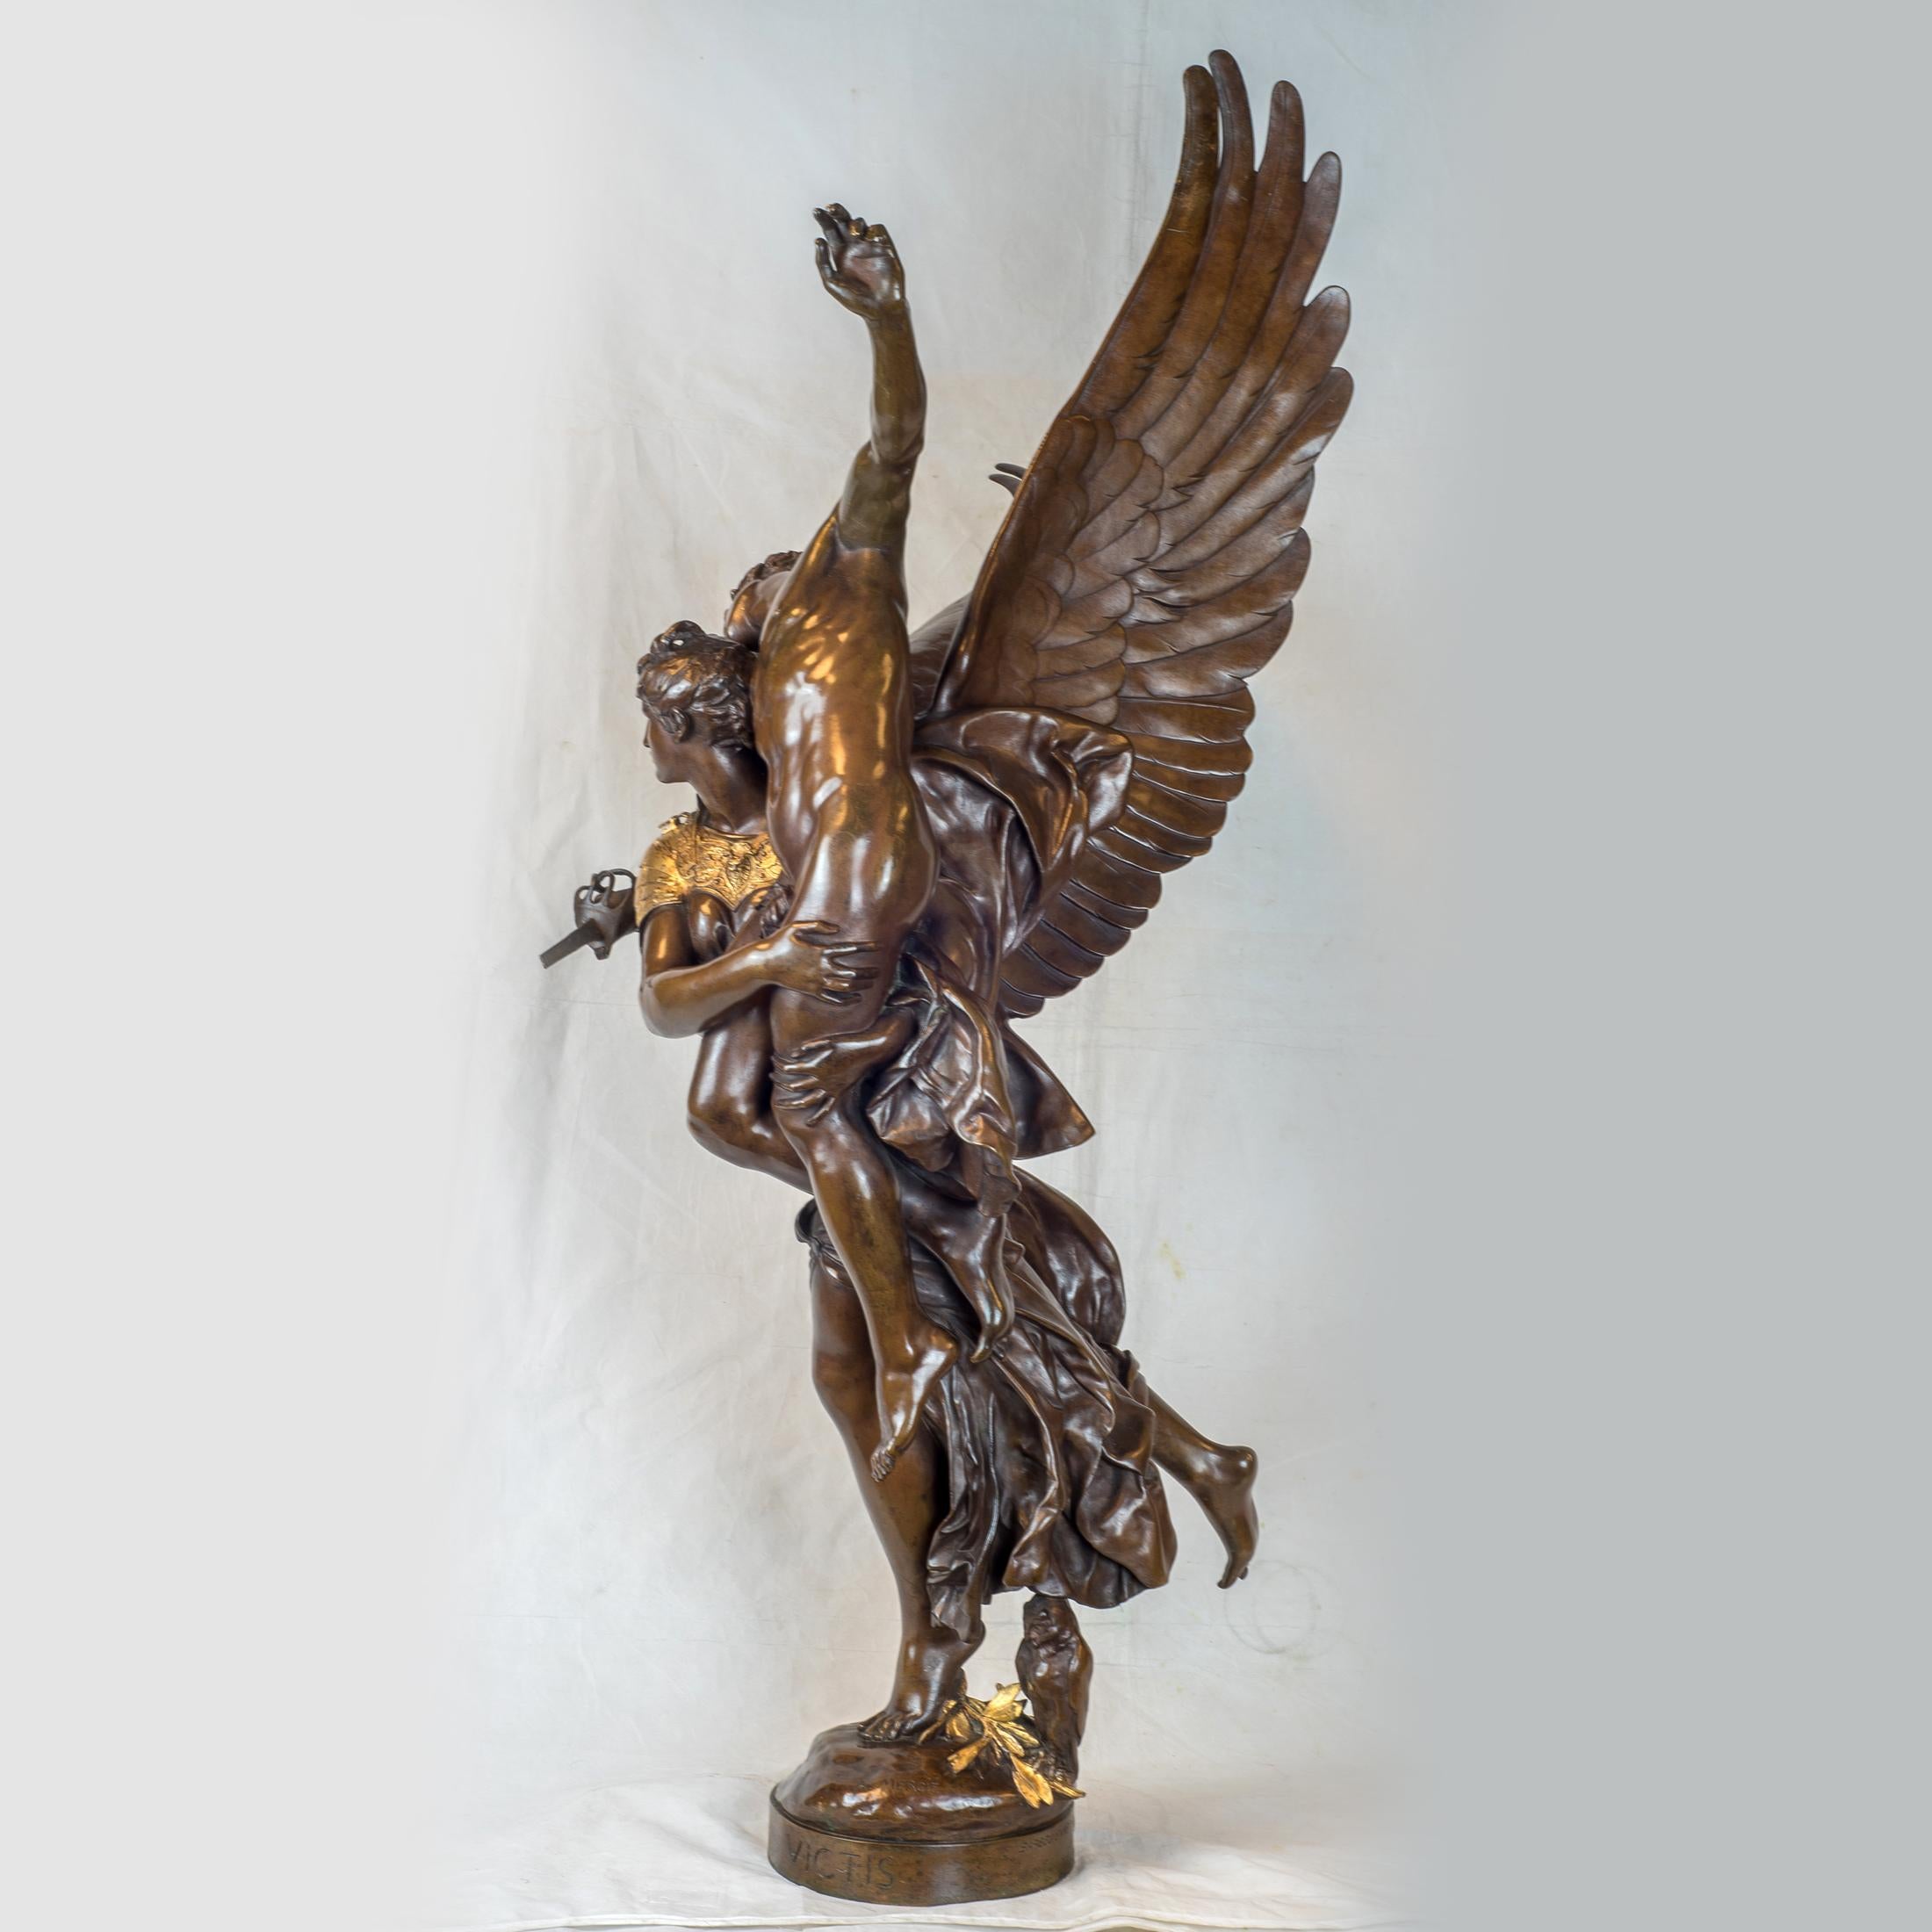 Exceptional quality bronze Group of Gloria Victis, a winged figure of victory carrying a fallen warrior by Antonin Mercié
Gloria Victis, bronze with brown patina. Inscribed with 'F. Barbedienne. Fonduer' mark and seal on base: A. Mercie / Gloria